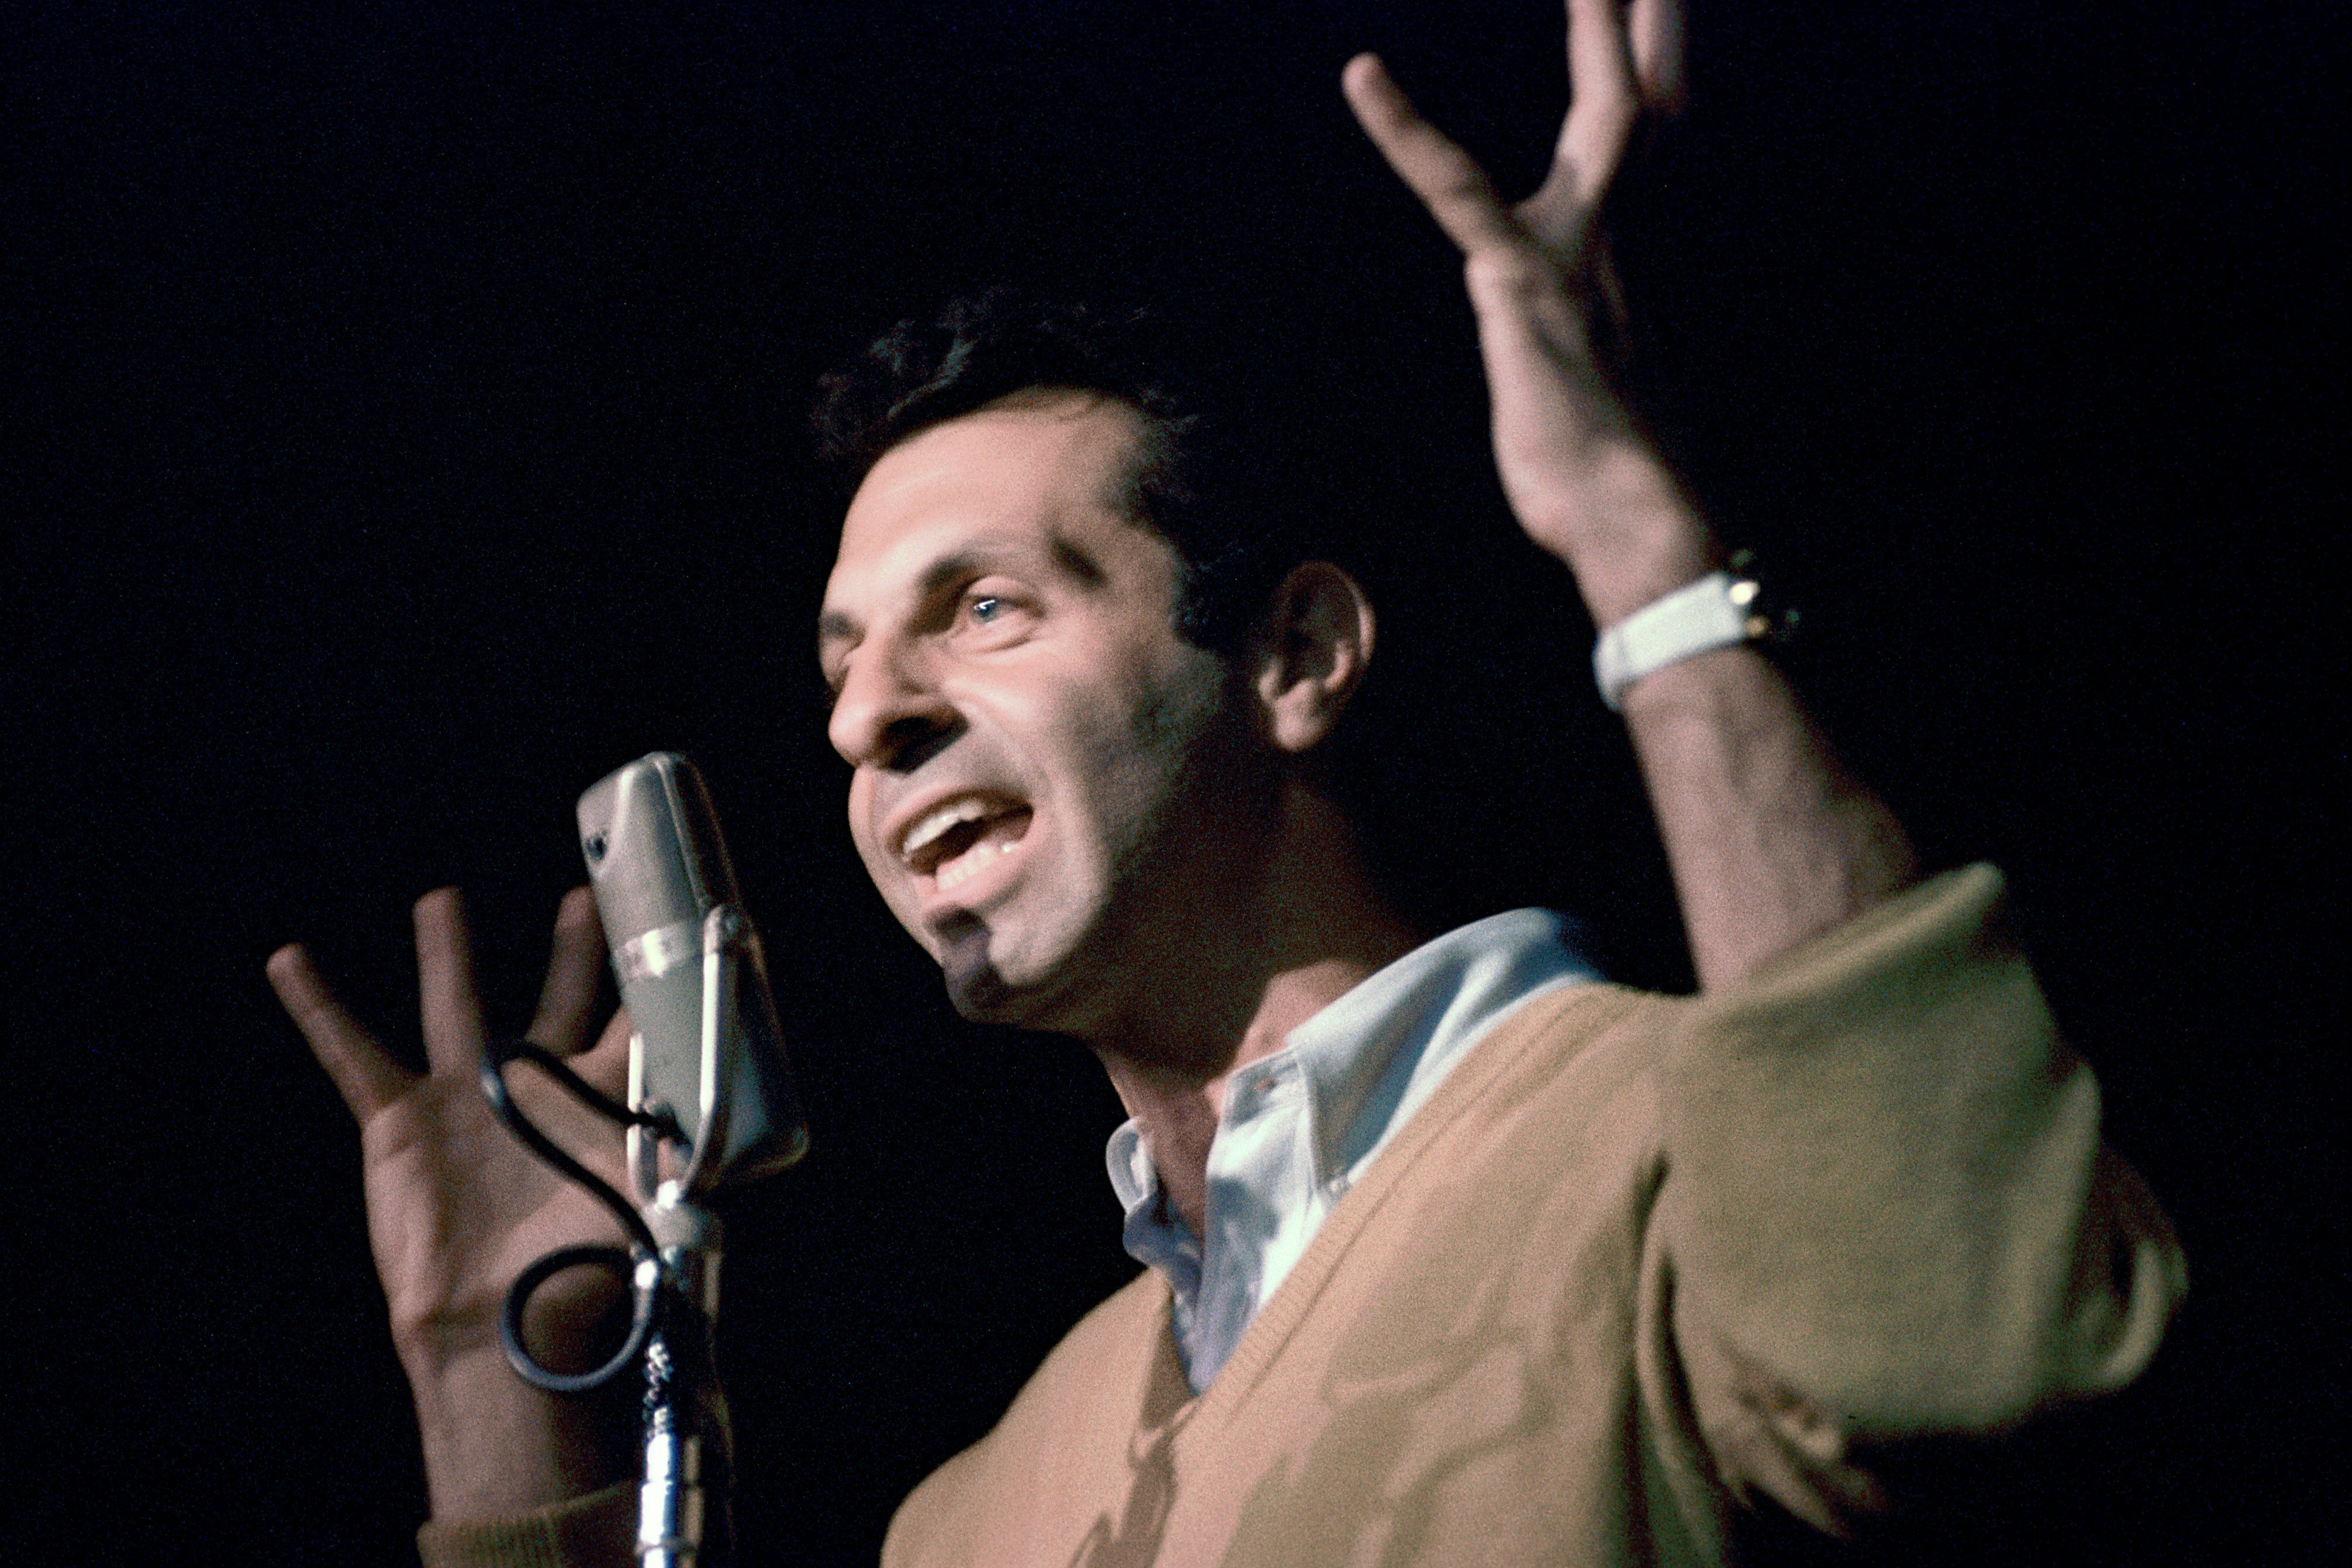 A young Mort Sahl speaking into a mic with his hands raised.